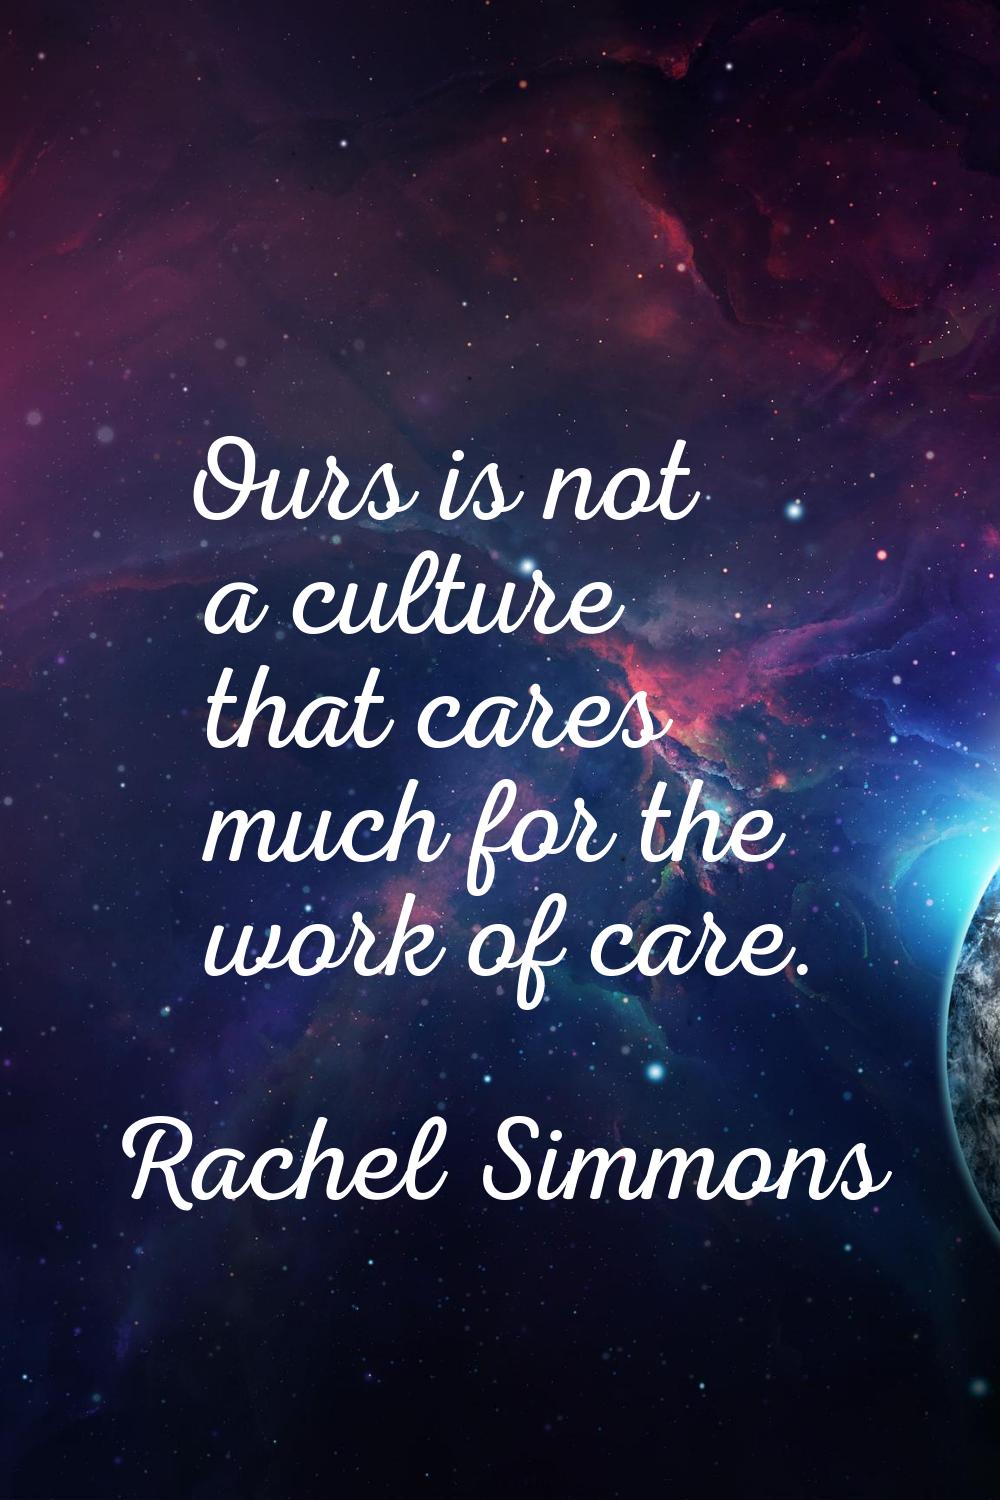 Ours is not a culture that cares much for the work of care.